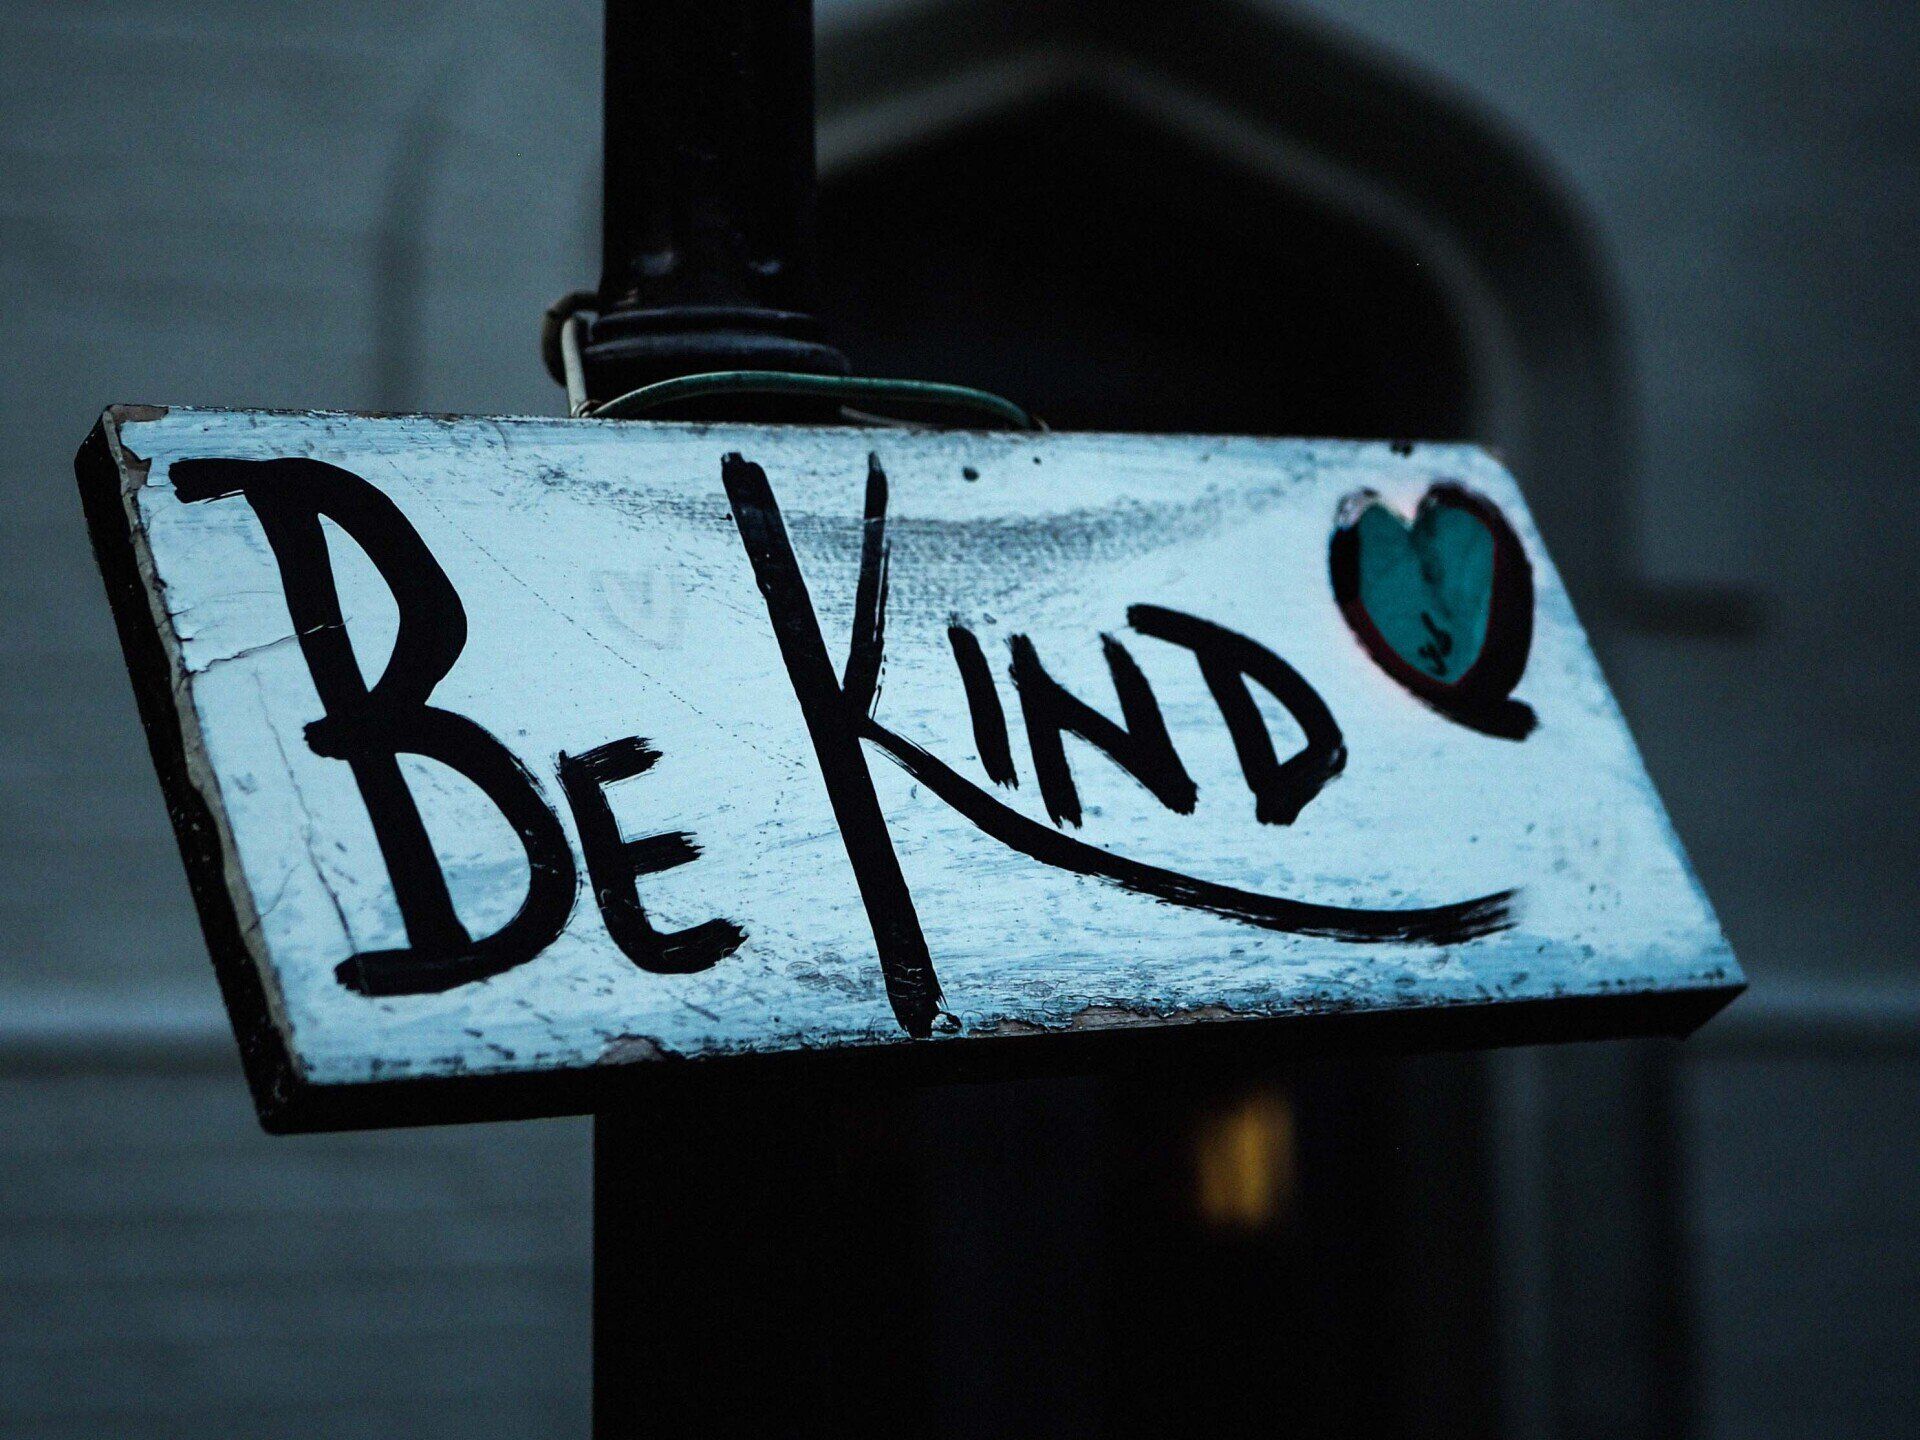 Be kind sign on road